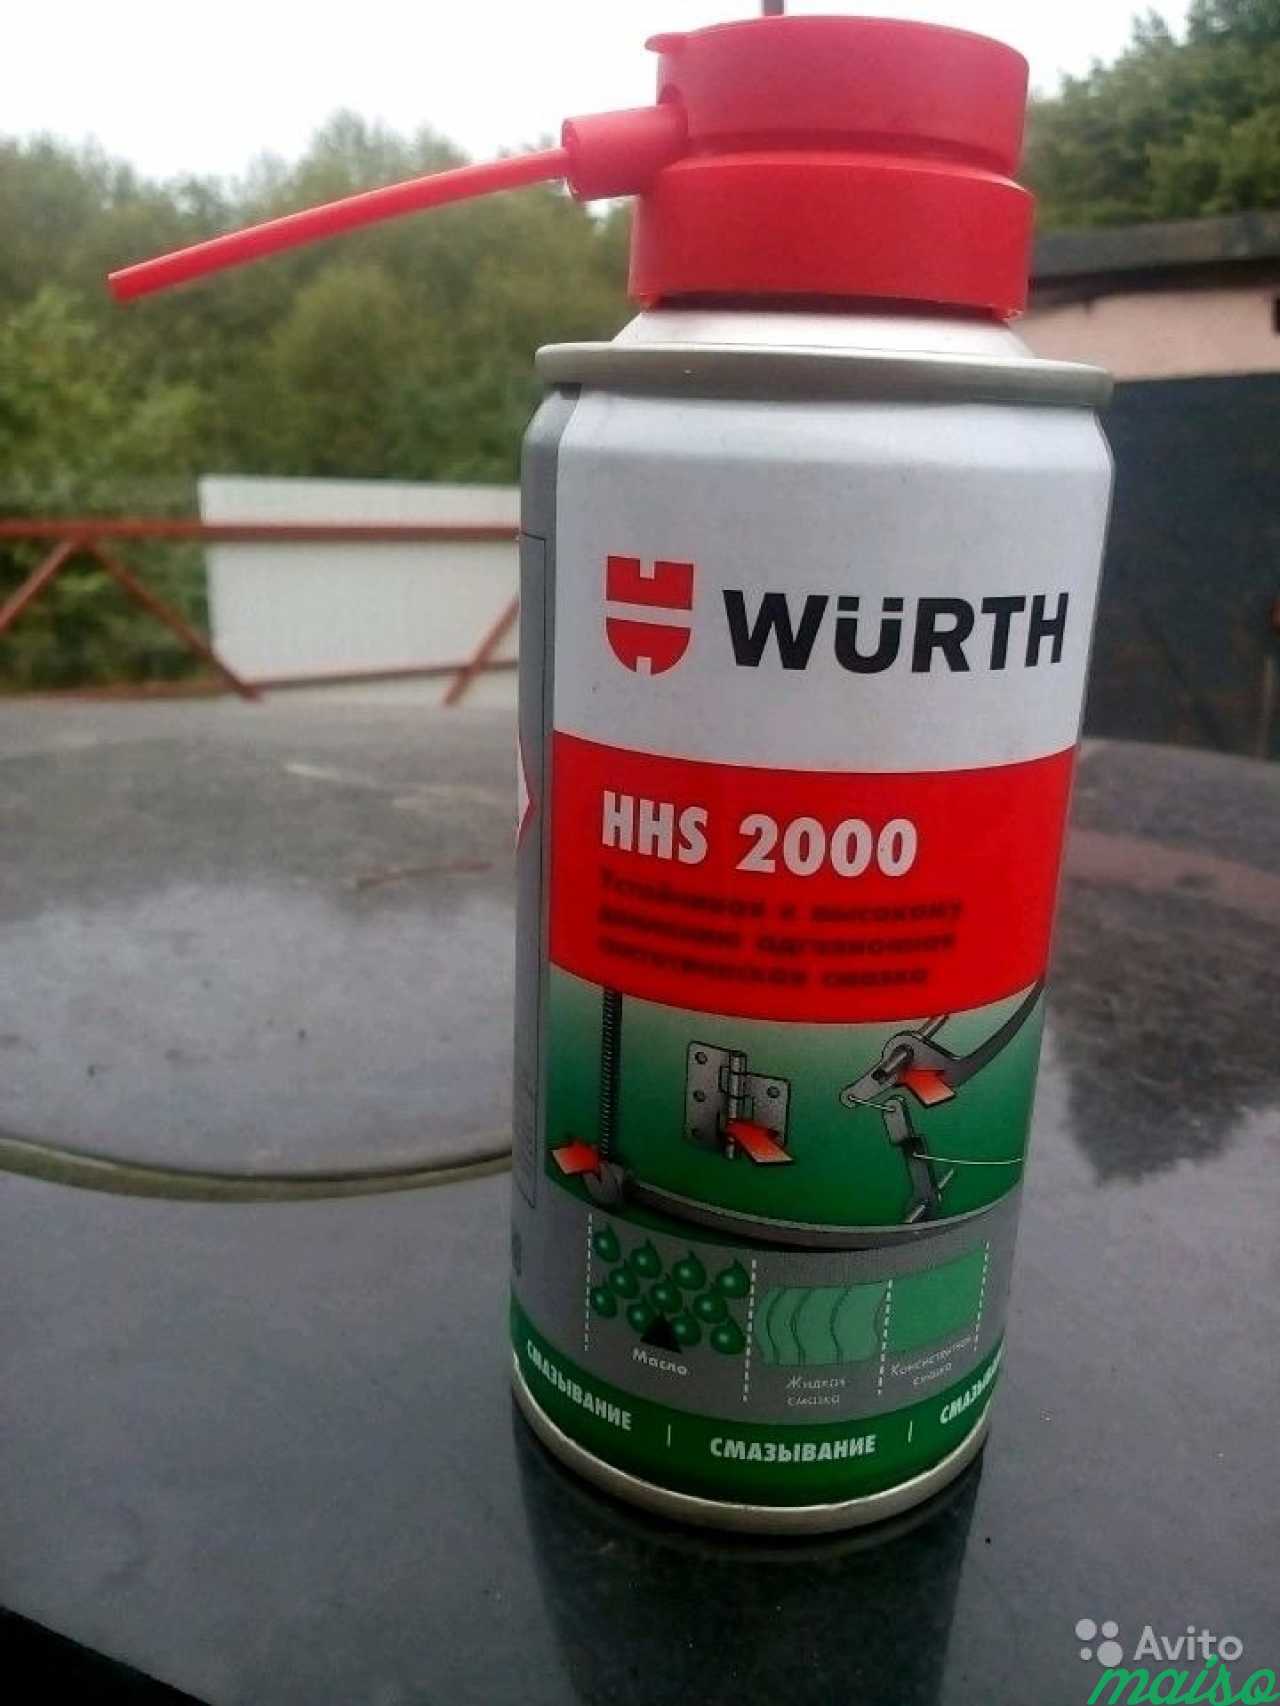 Wurth hhs 2000